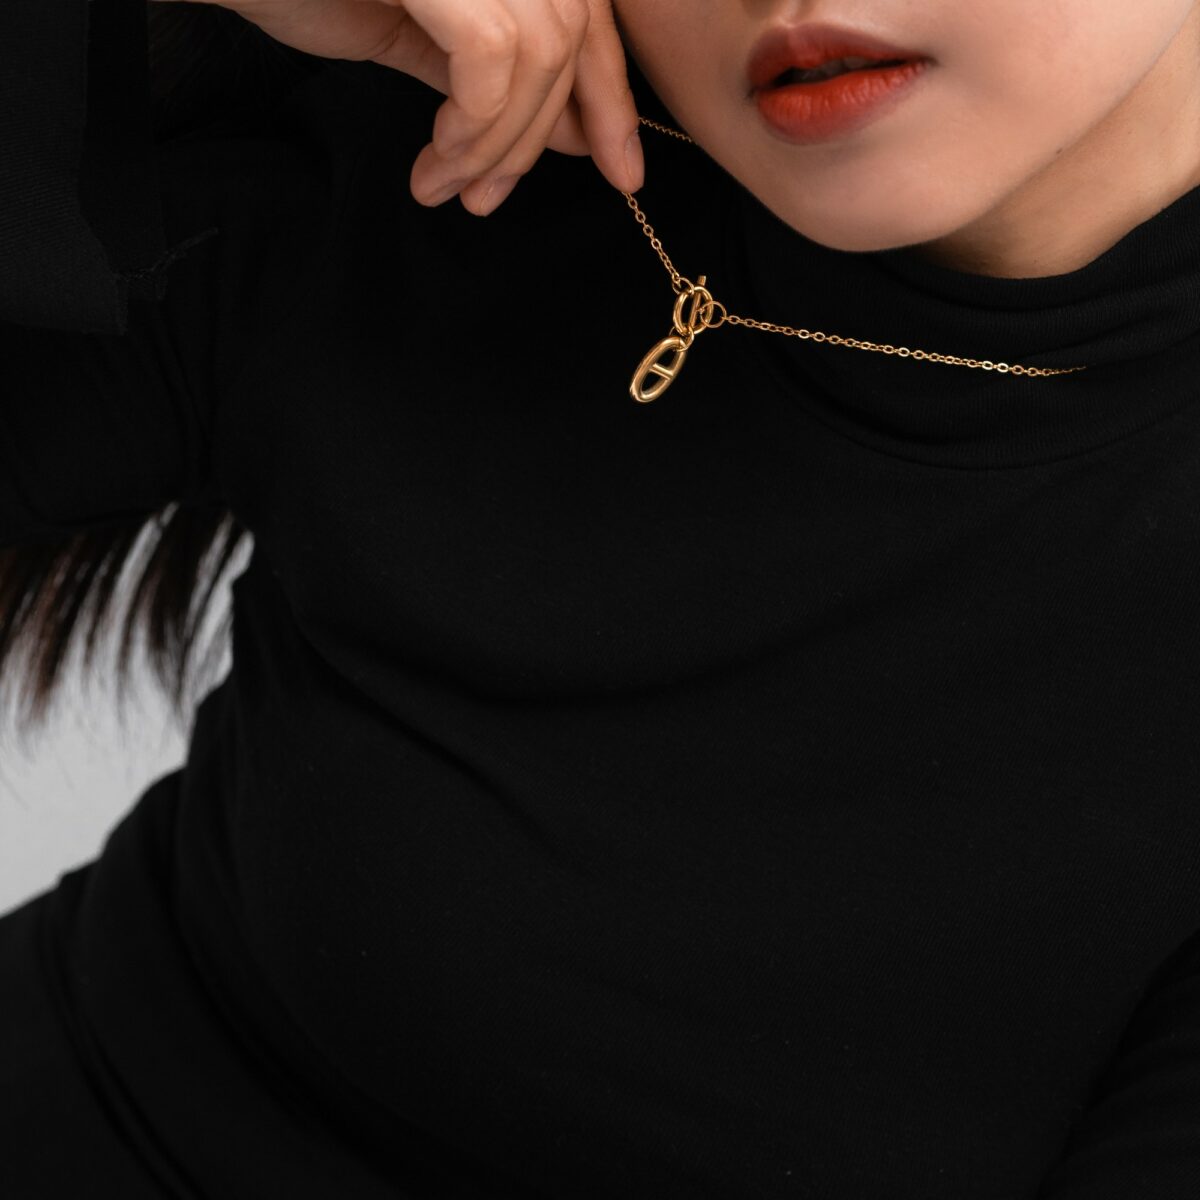 https://m.clubbella.co/product/classic-toggle-gold-necklace/ DSC06654-Edit-1